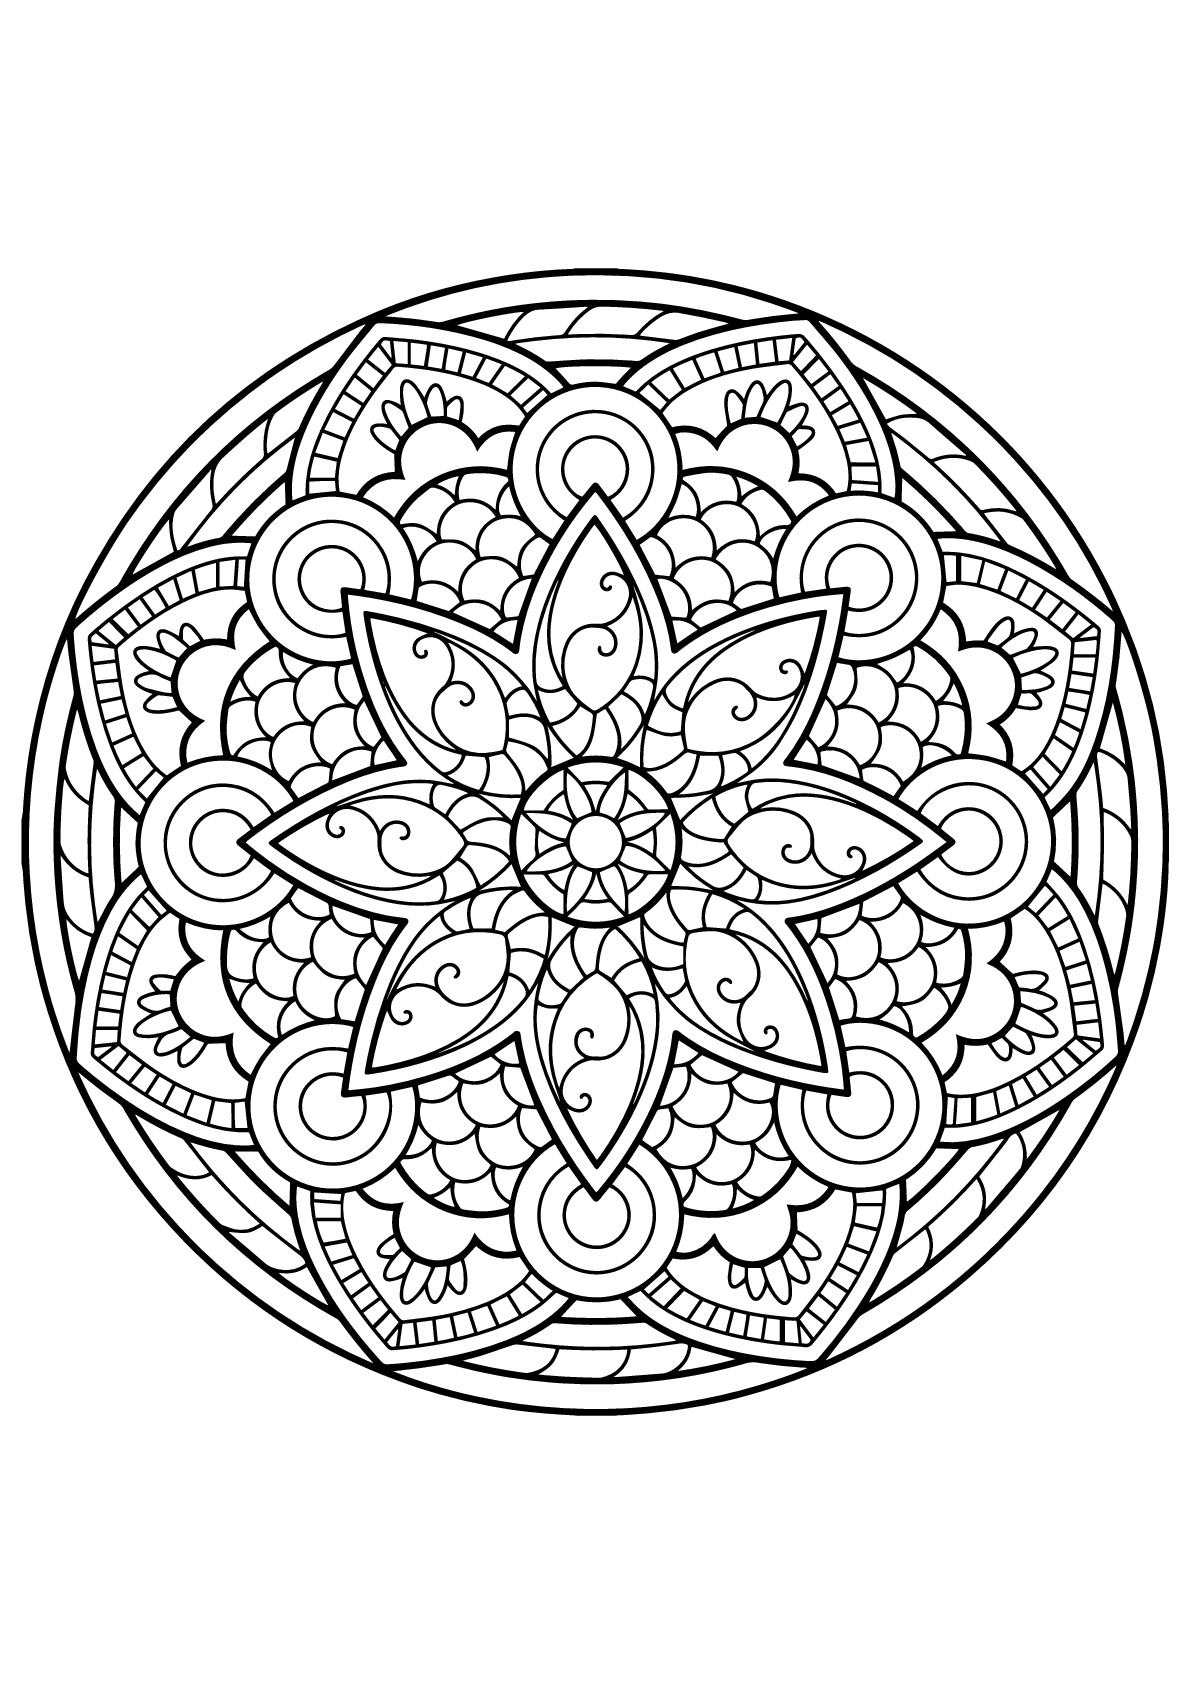 Download Mandala from free coloring books for adults 4 - Mandalas Adult Coloring Pages